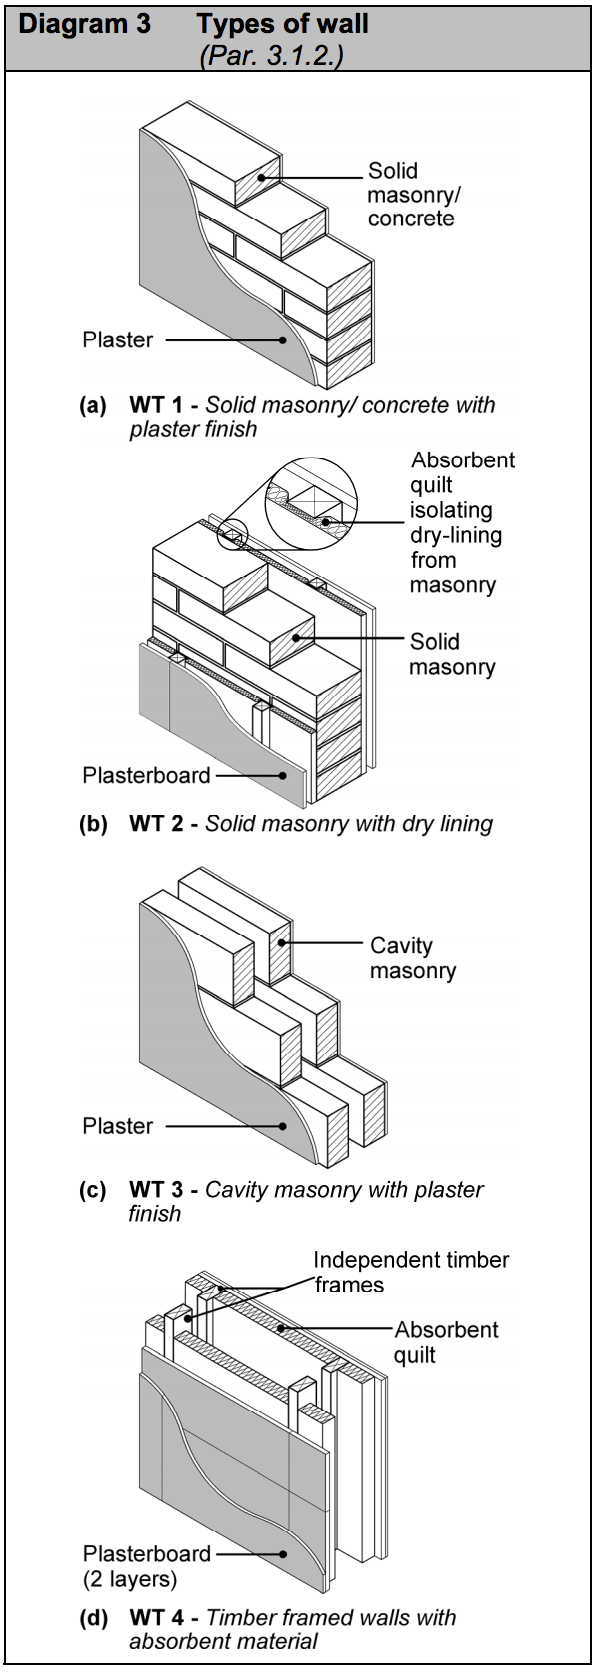 Diagram HE3 - Types of wall - Extract from TGD E